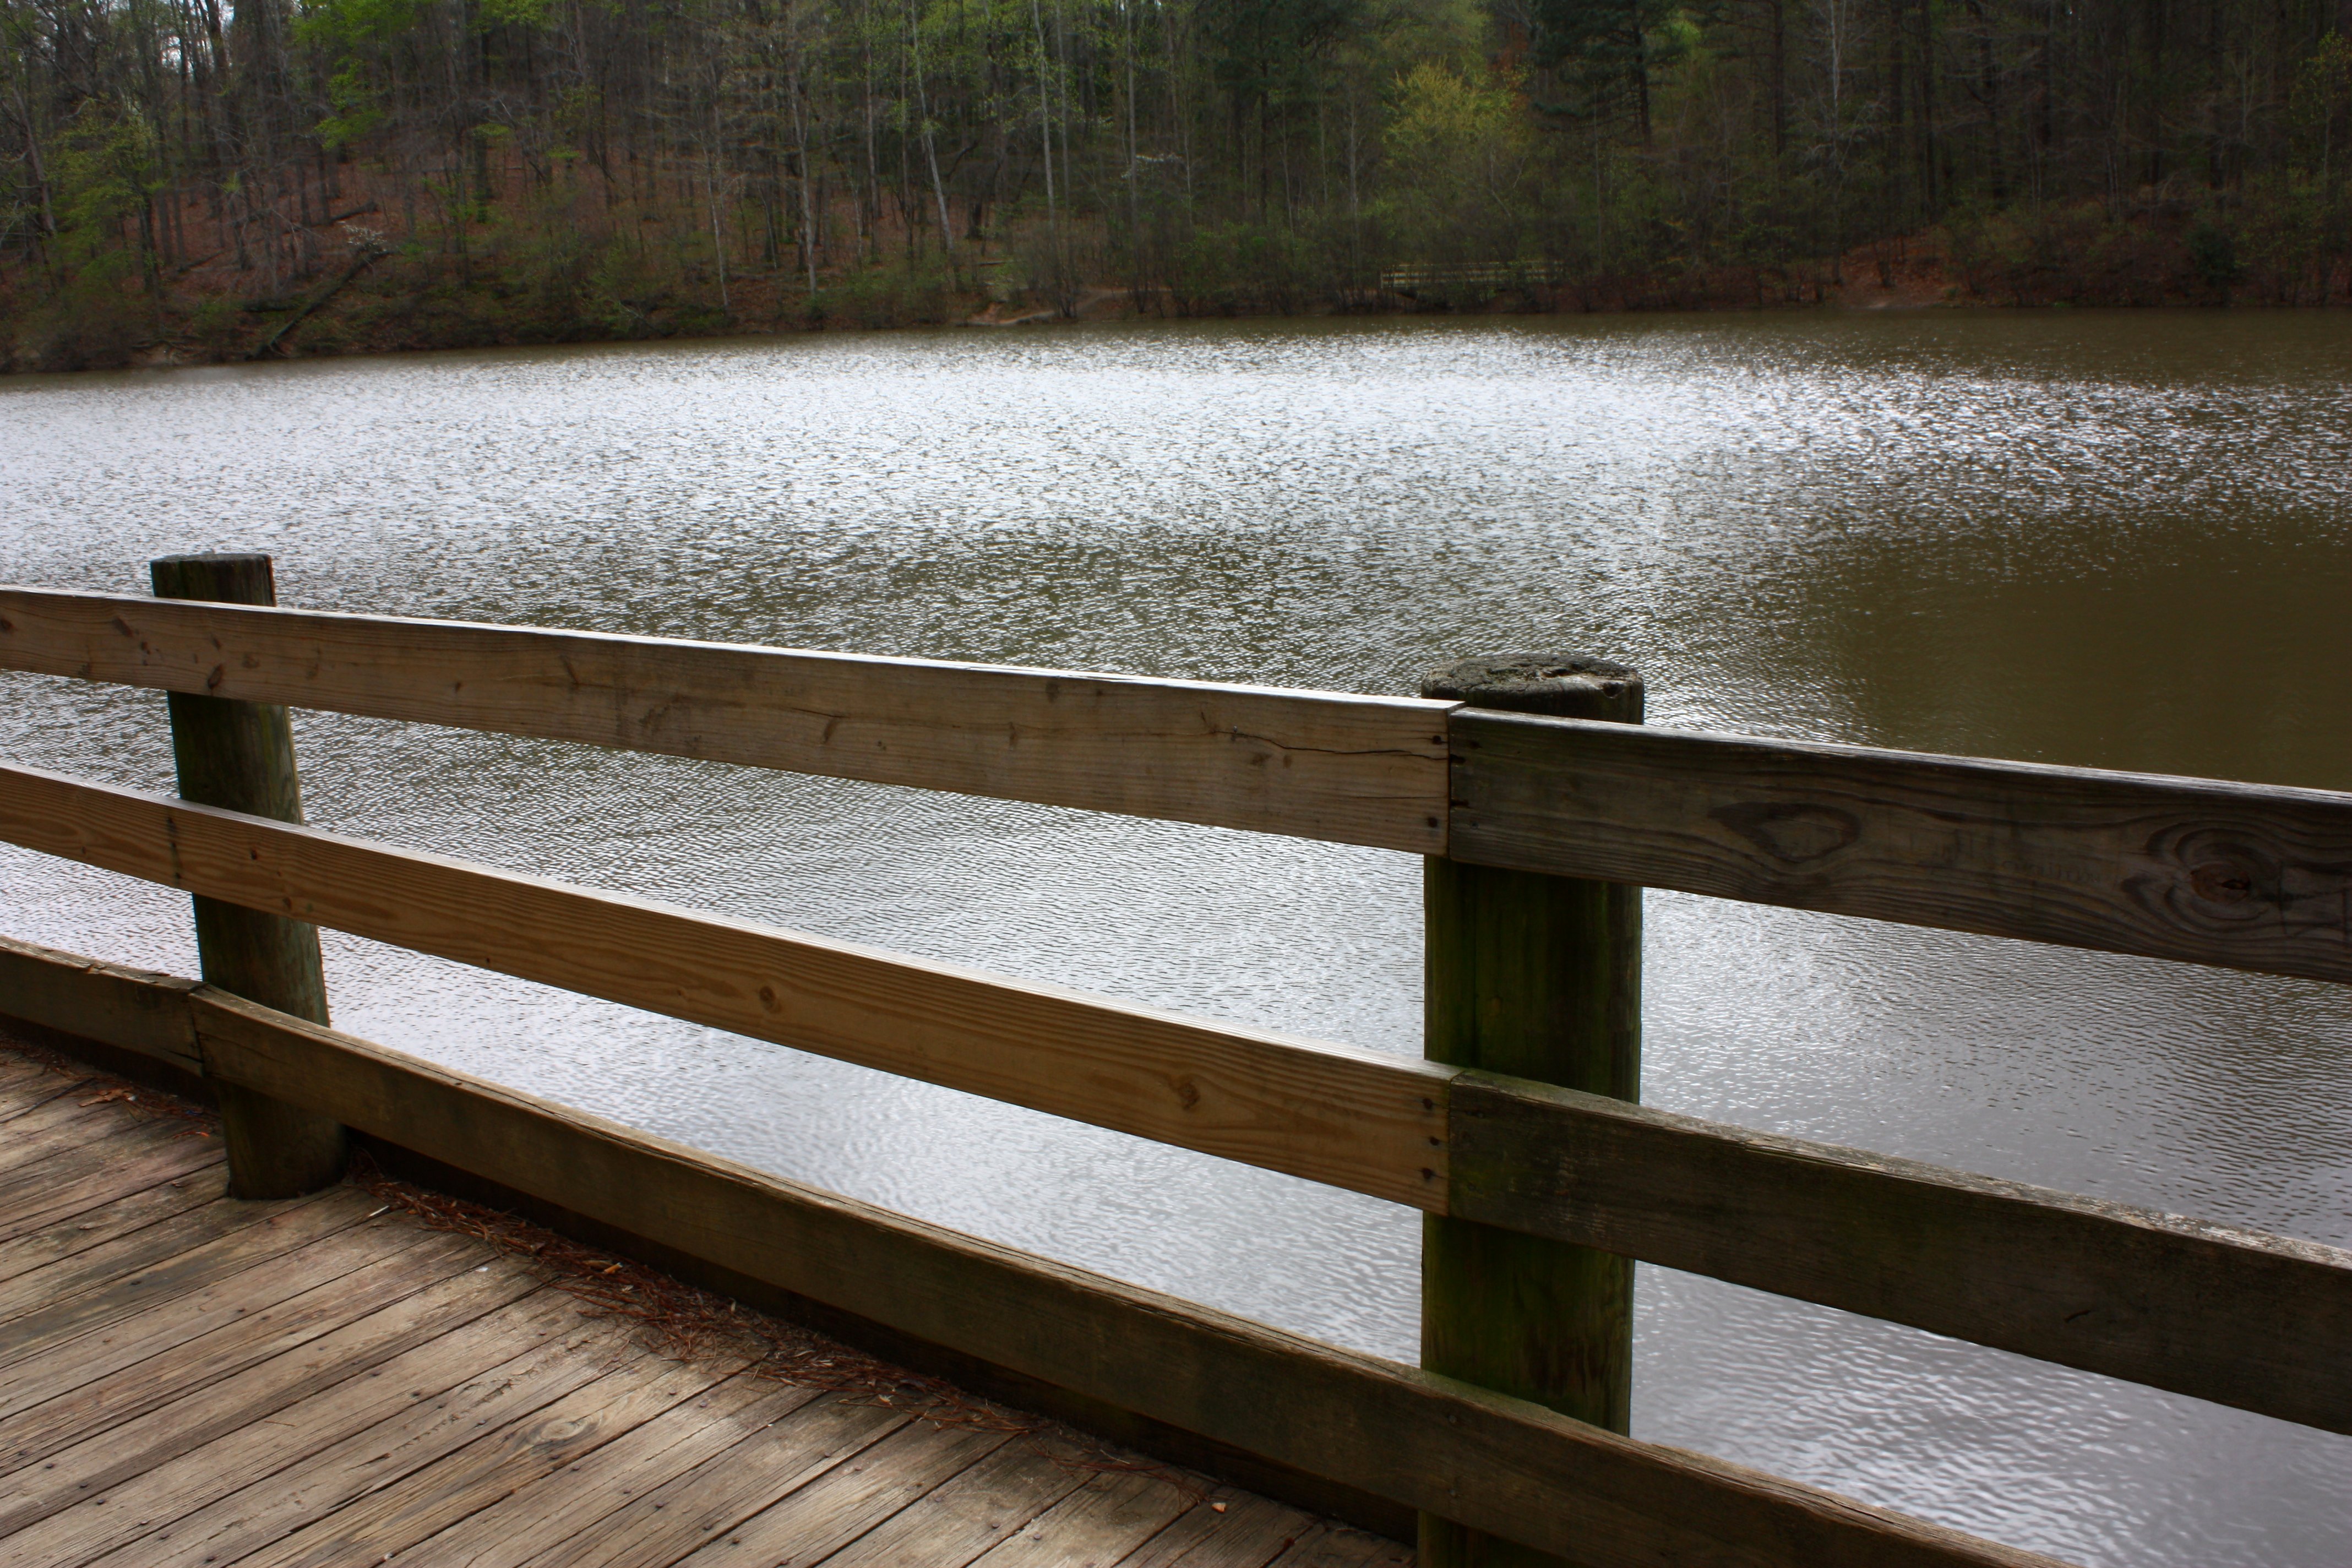 A wooden fence by a lake photo